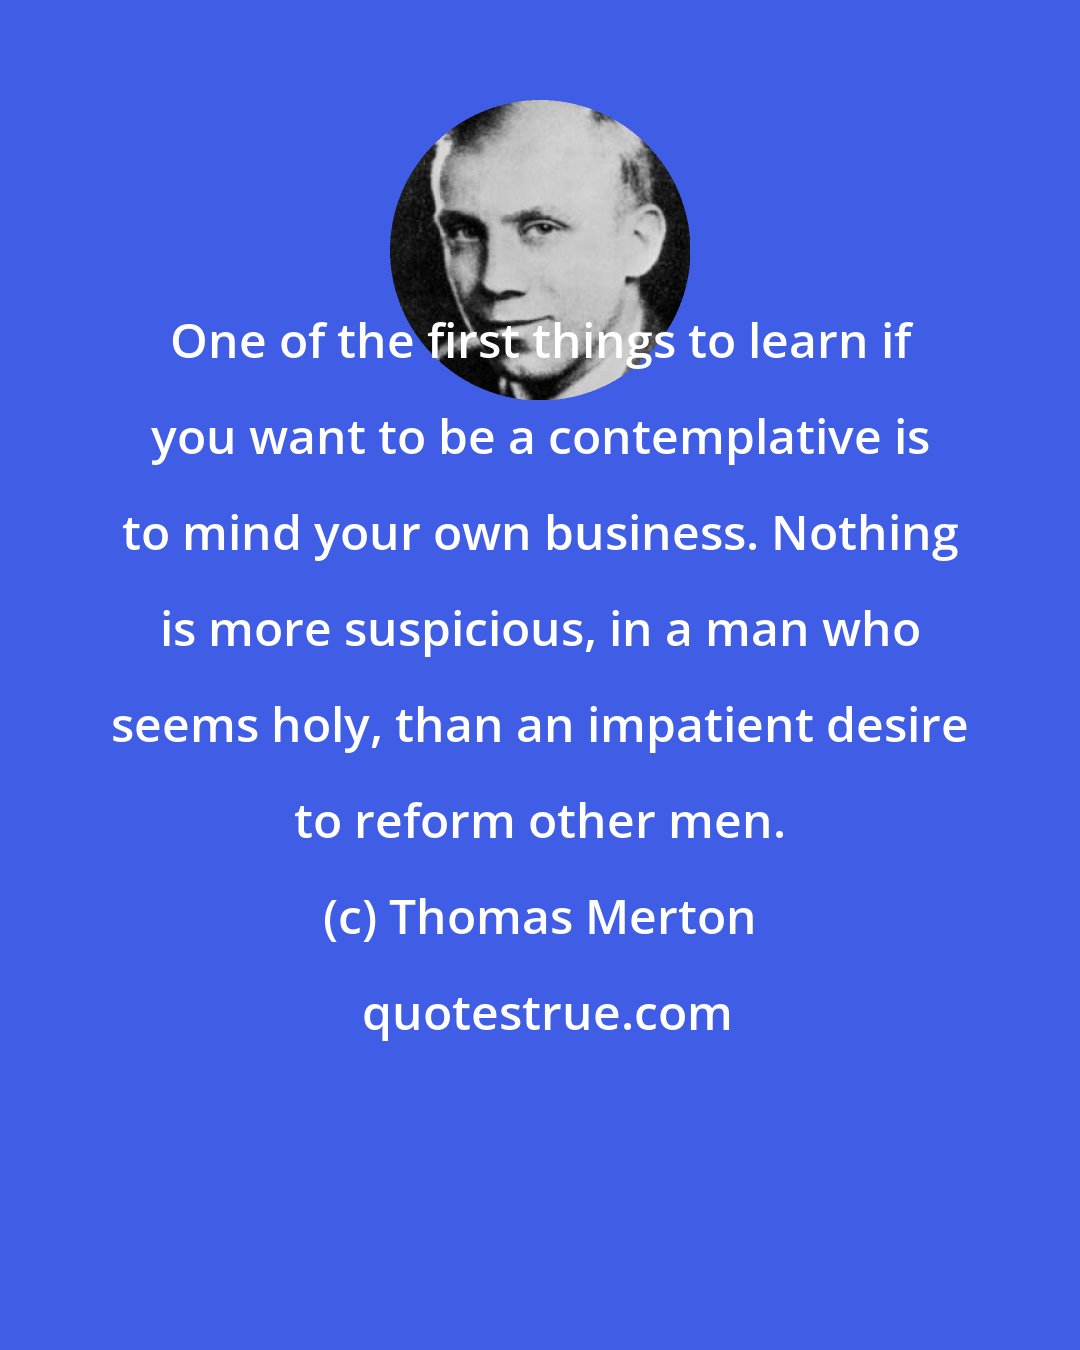 Thomas Merton: One of the first things to learn if you want to be a contemplative is to mind your own business. Nothing is more suspicious, in a man who seems holy, than an impatient desire to reform other men.